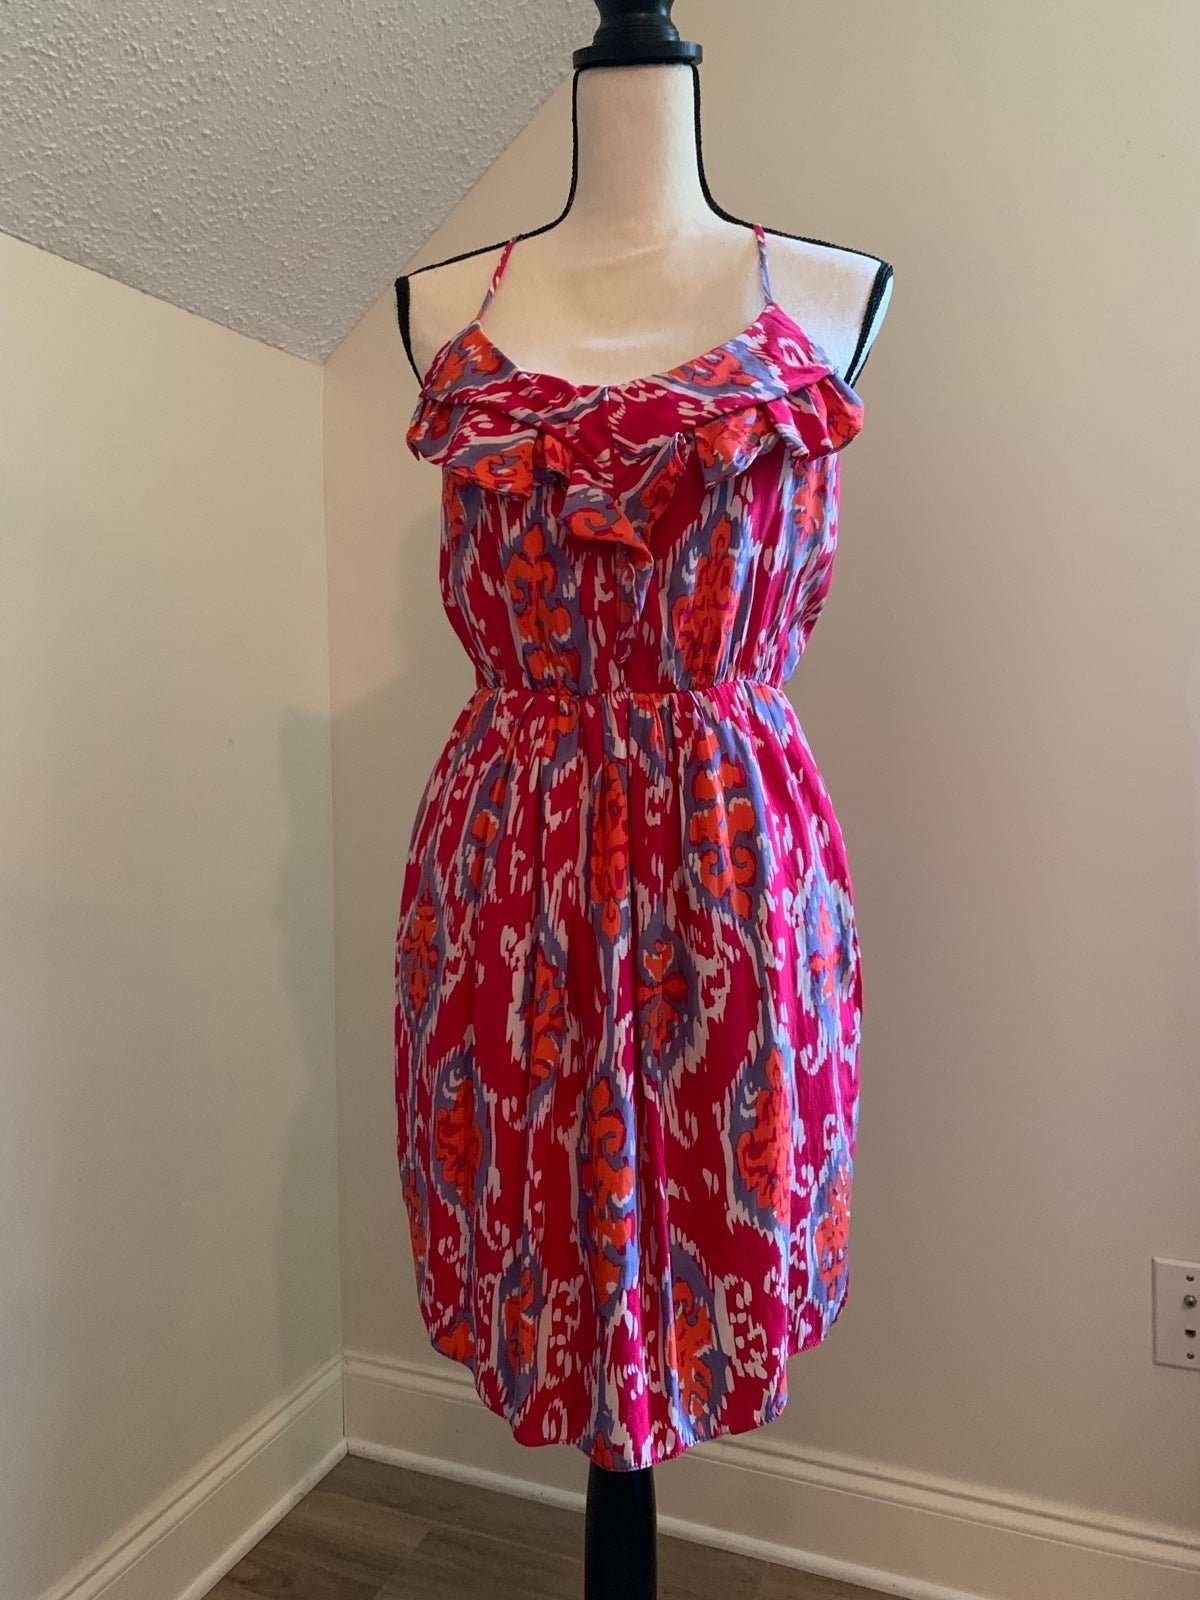 large selection Nell Couture Silk Summer Dress Sz. 4 fK